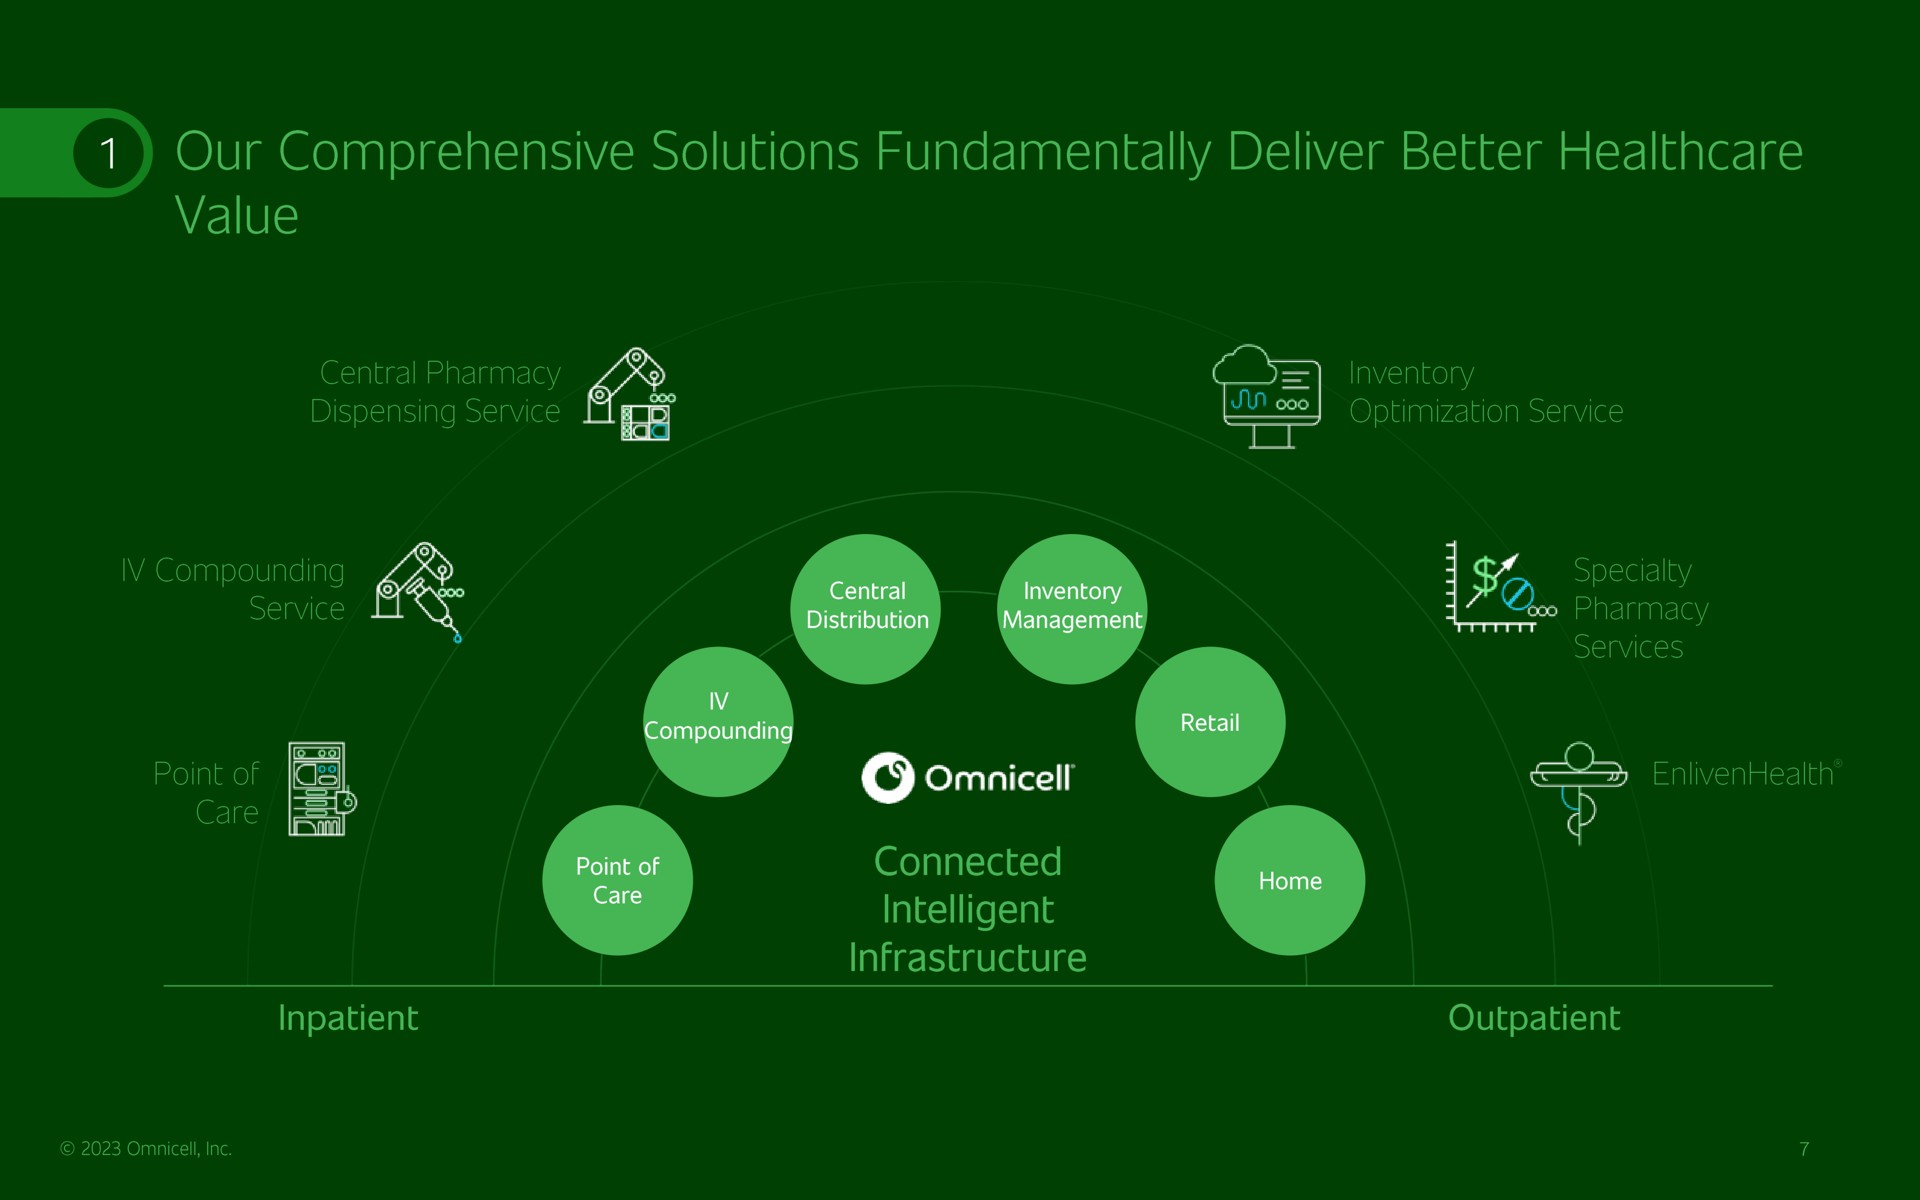 our comprehensive solutions fundamentally deliver better vee central pharmacy am a compounding service an is connected intelligent infrastructure inpatient outpatient | Omnicell